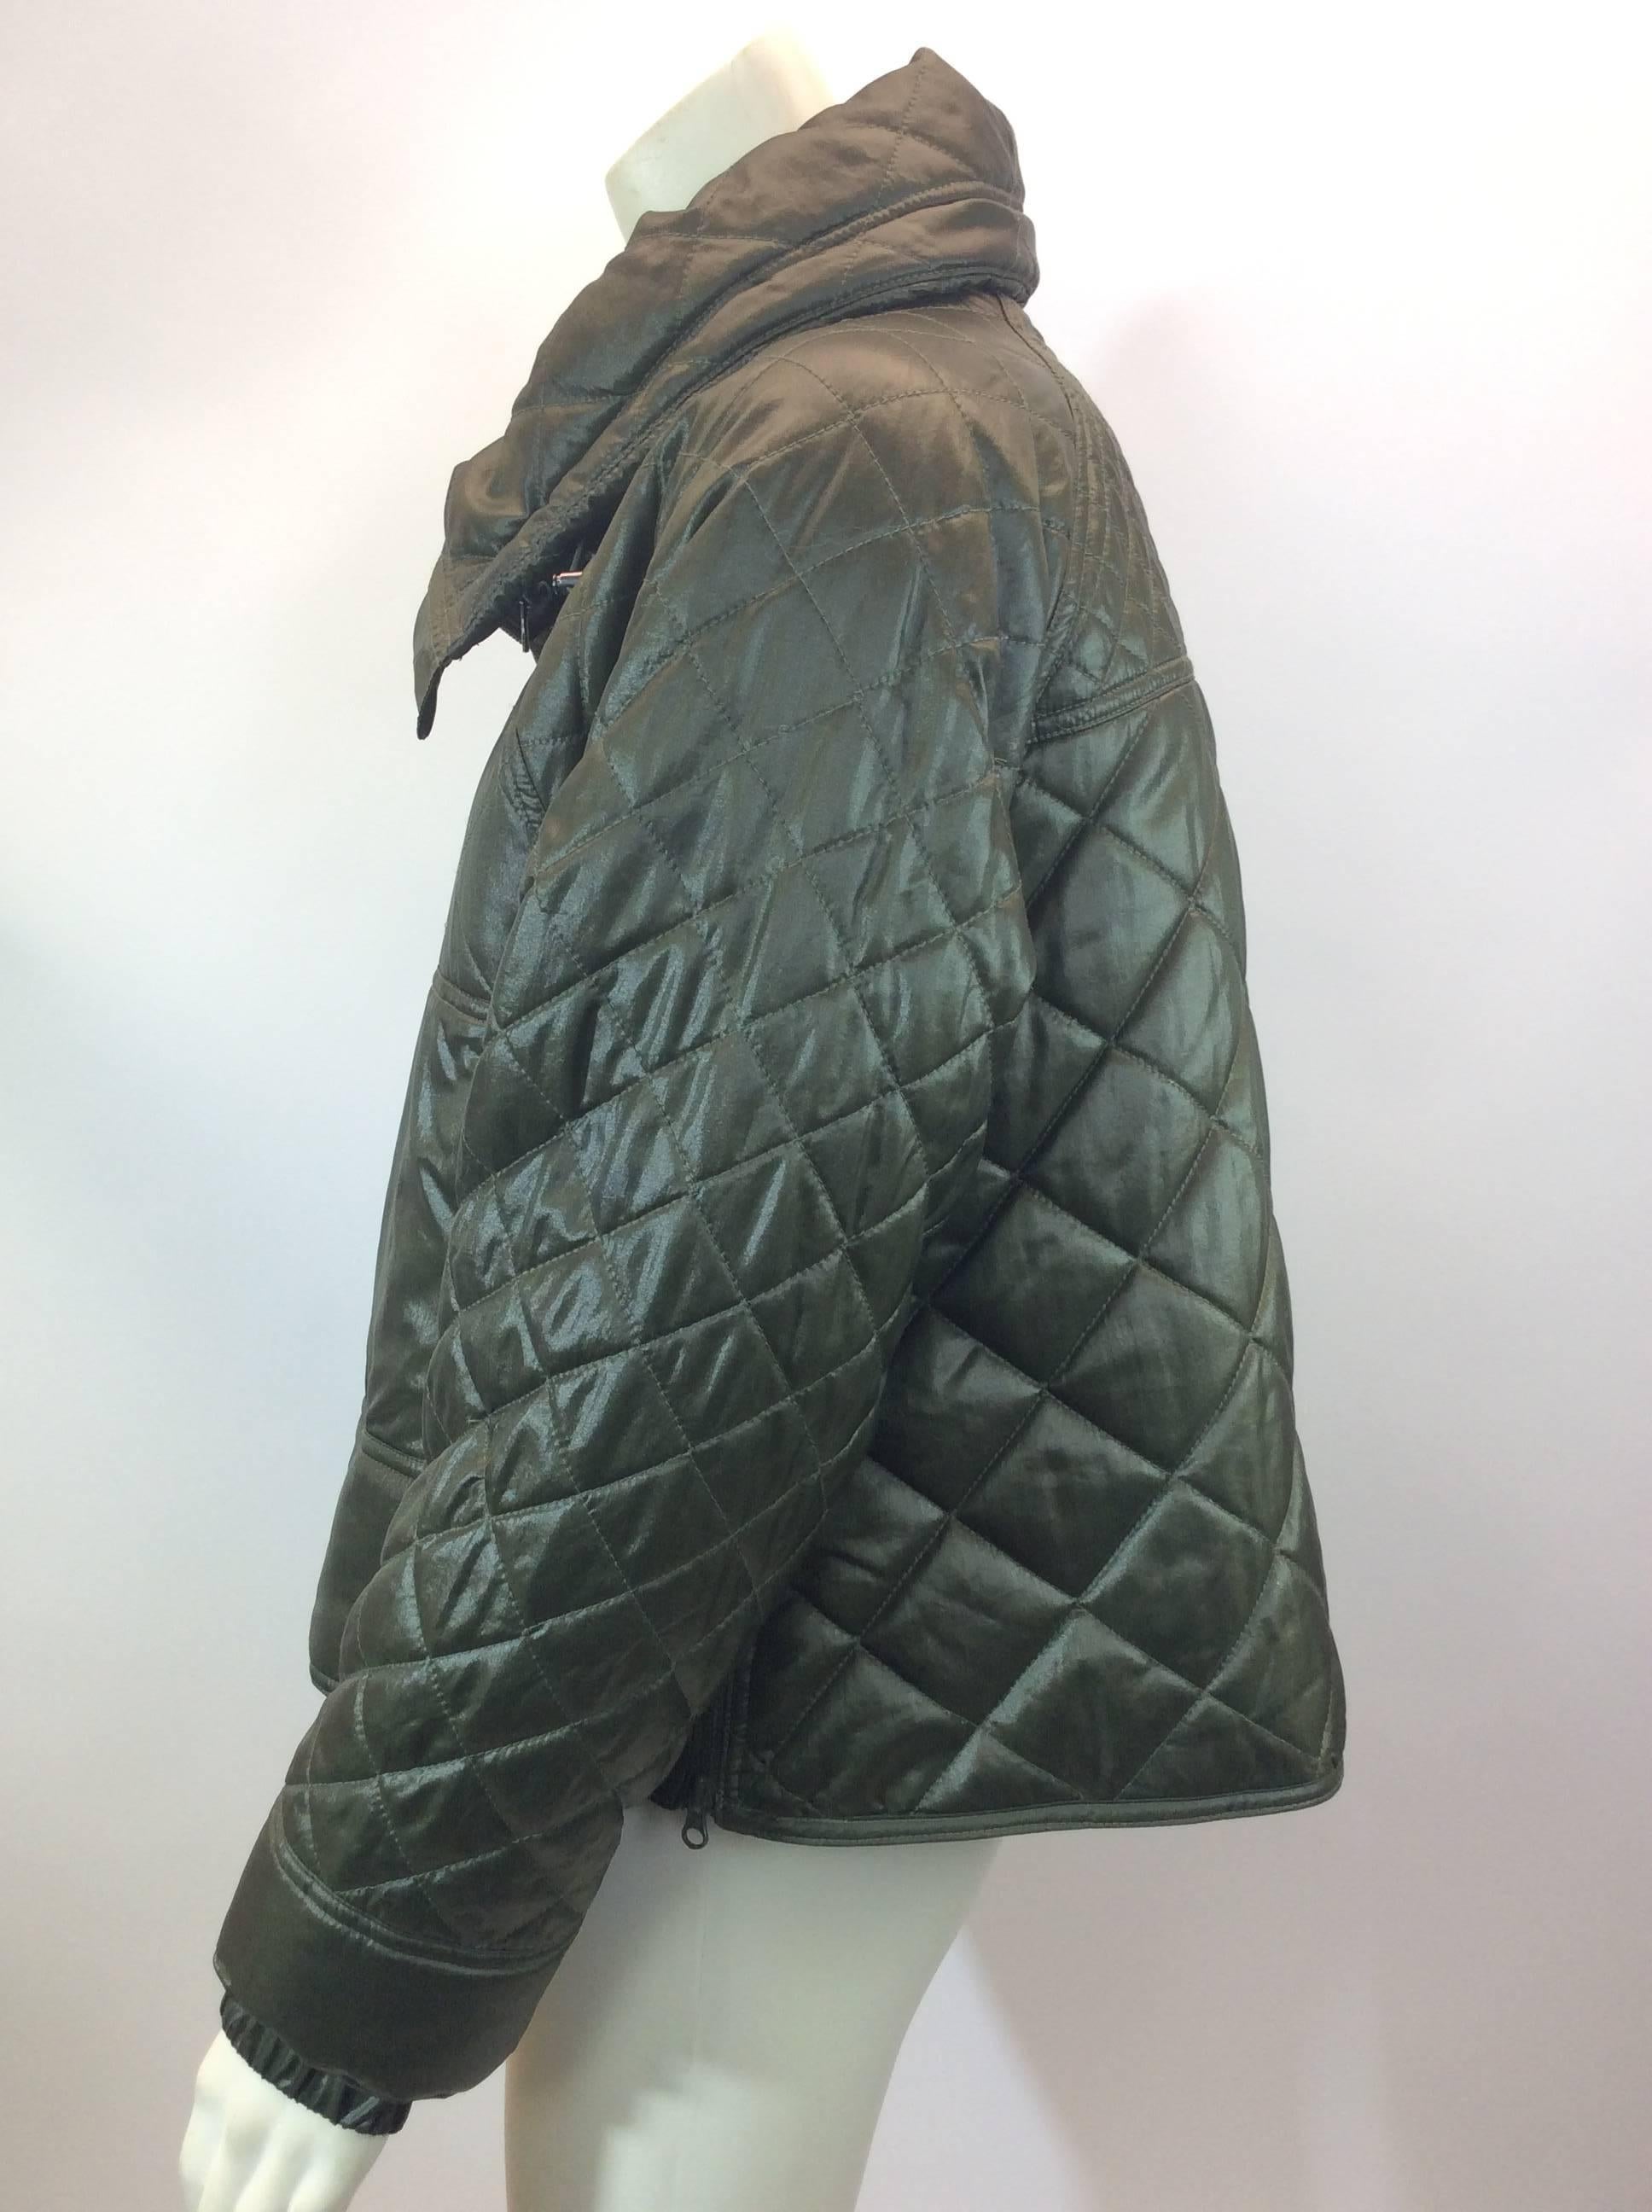 Stella McCartney Green Quilted Cropped Coat
$450
Length 20